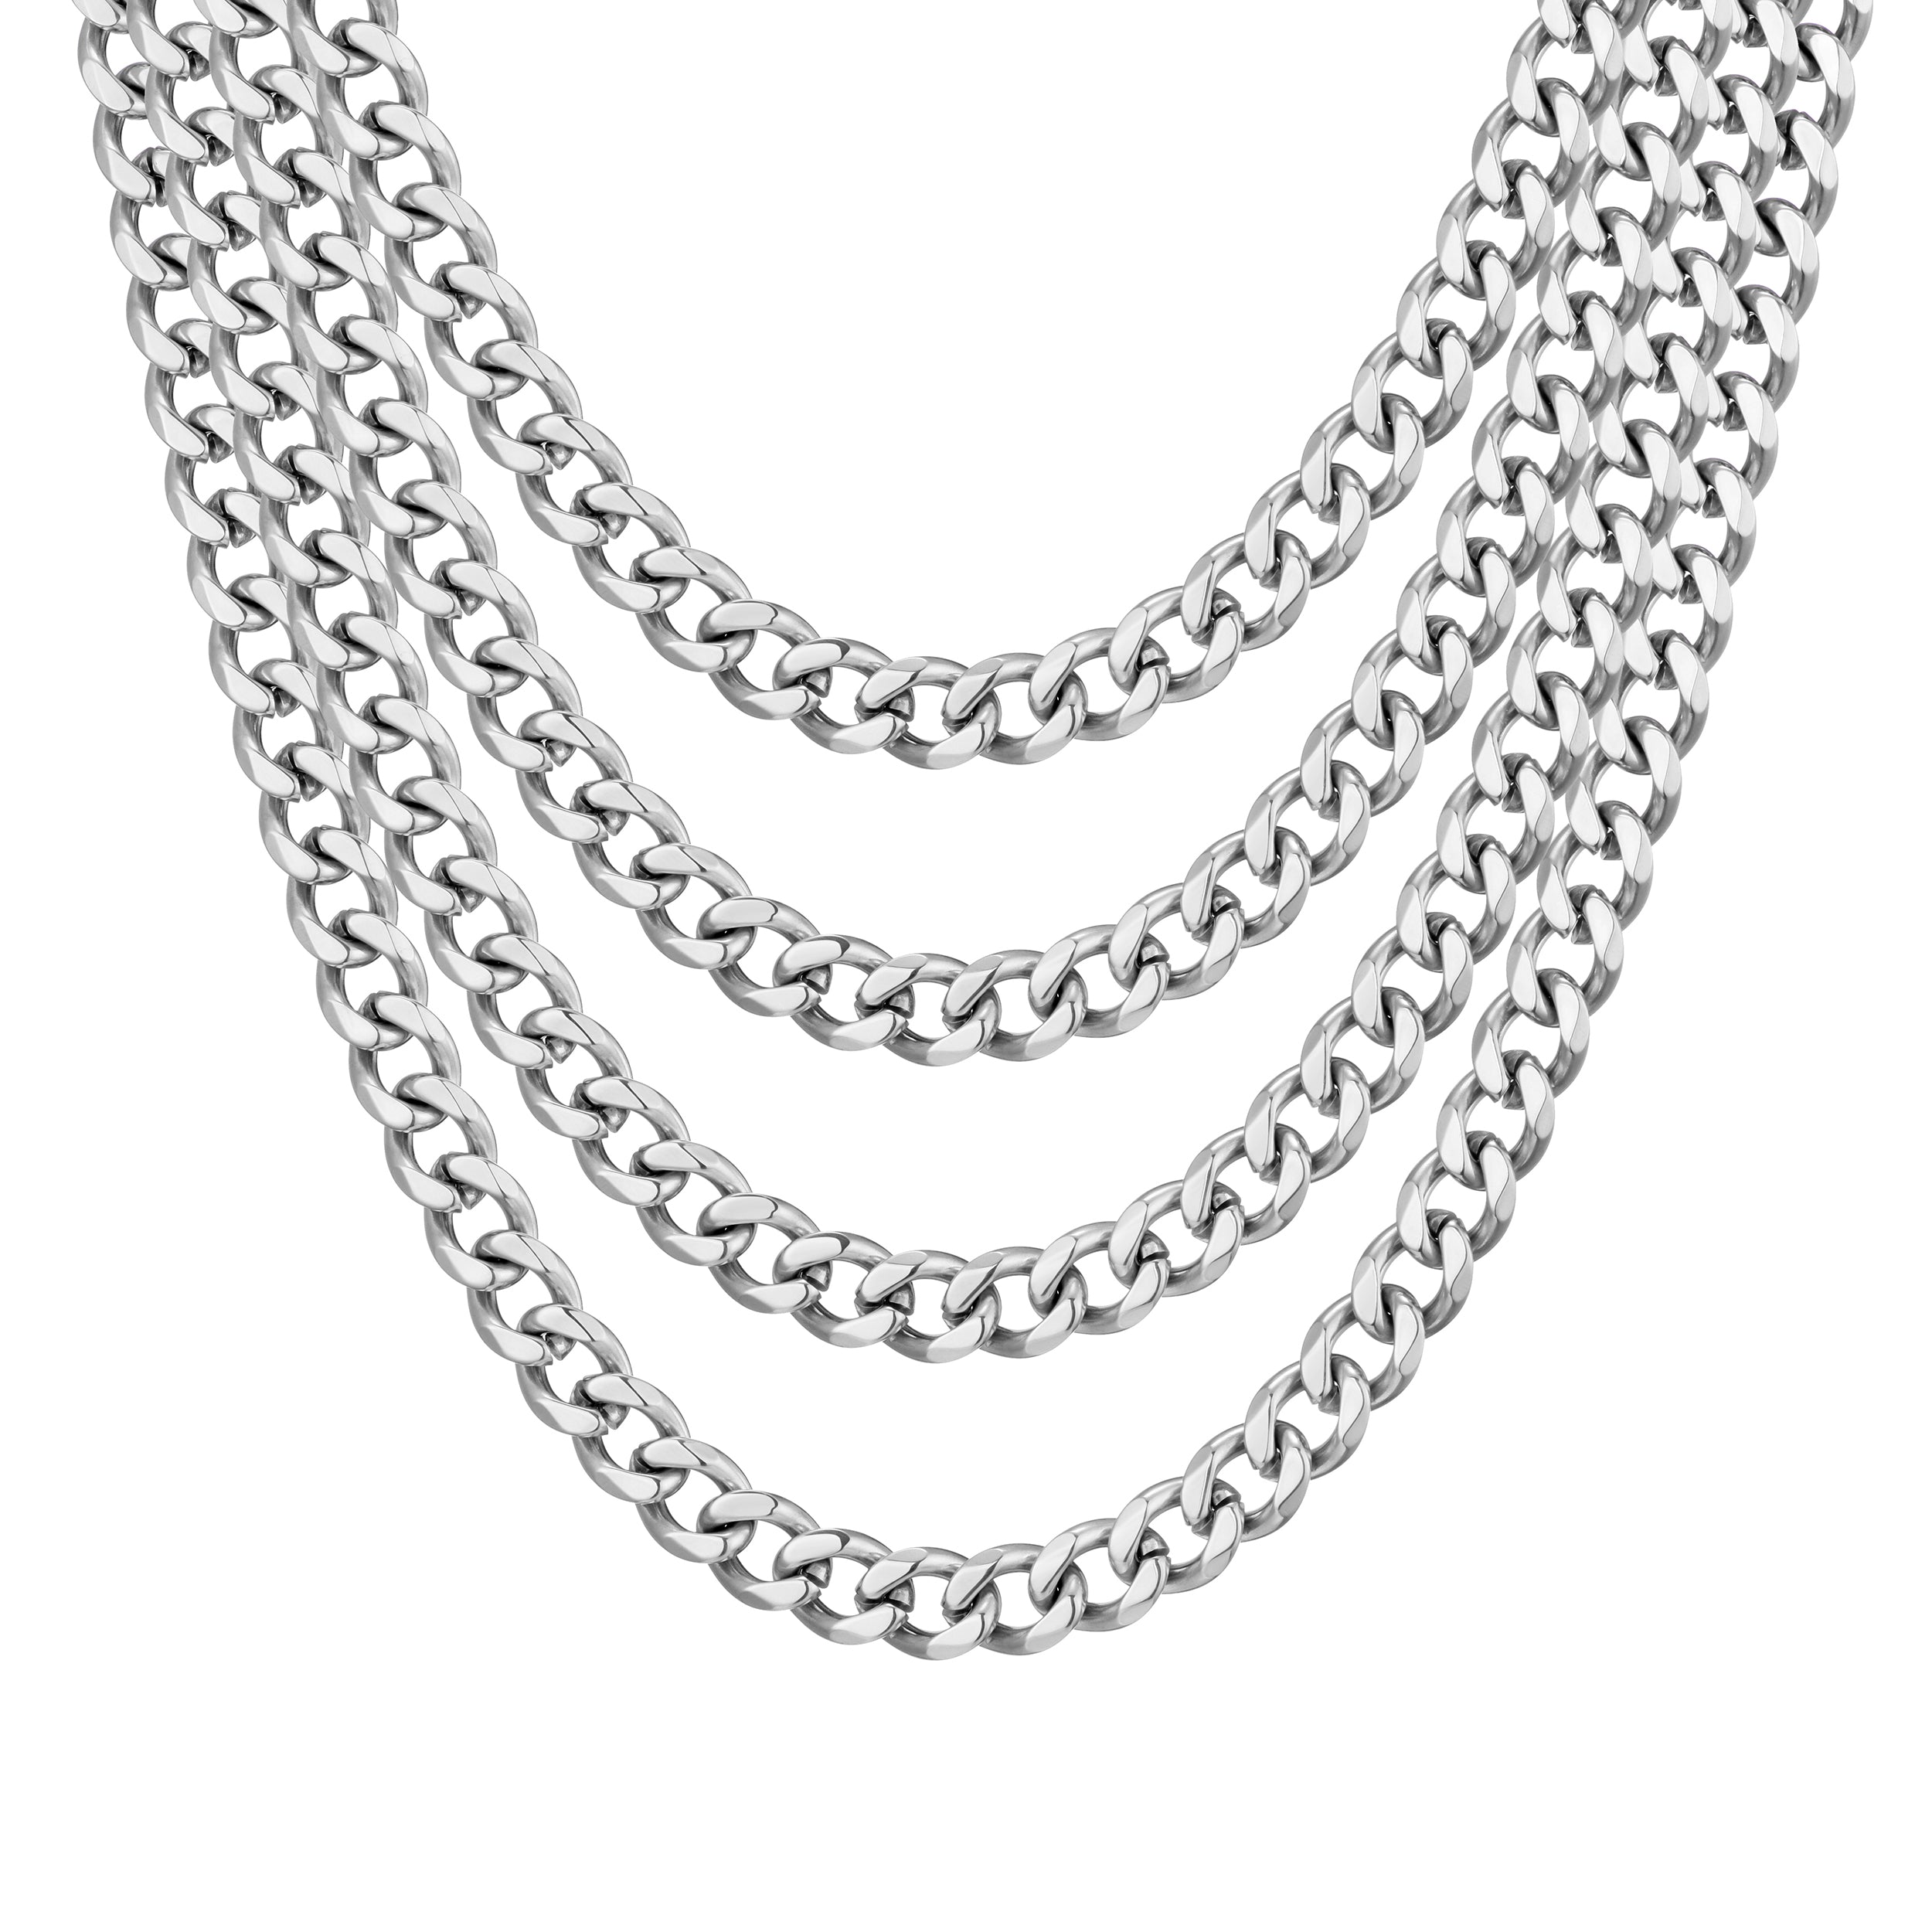 Men's 12mm Stainless Steel 18-24 Inch Curb Chain Necklace by Philip Jones Jewellery